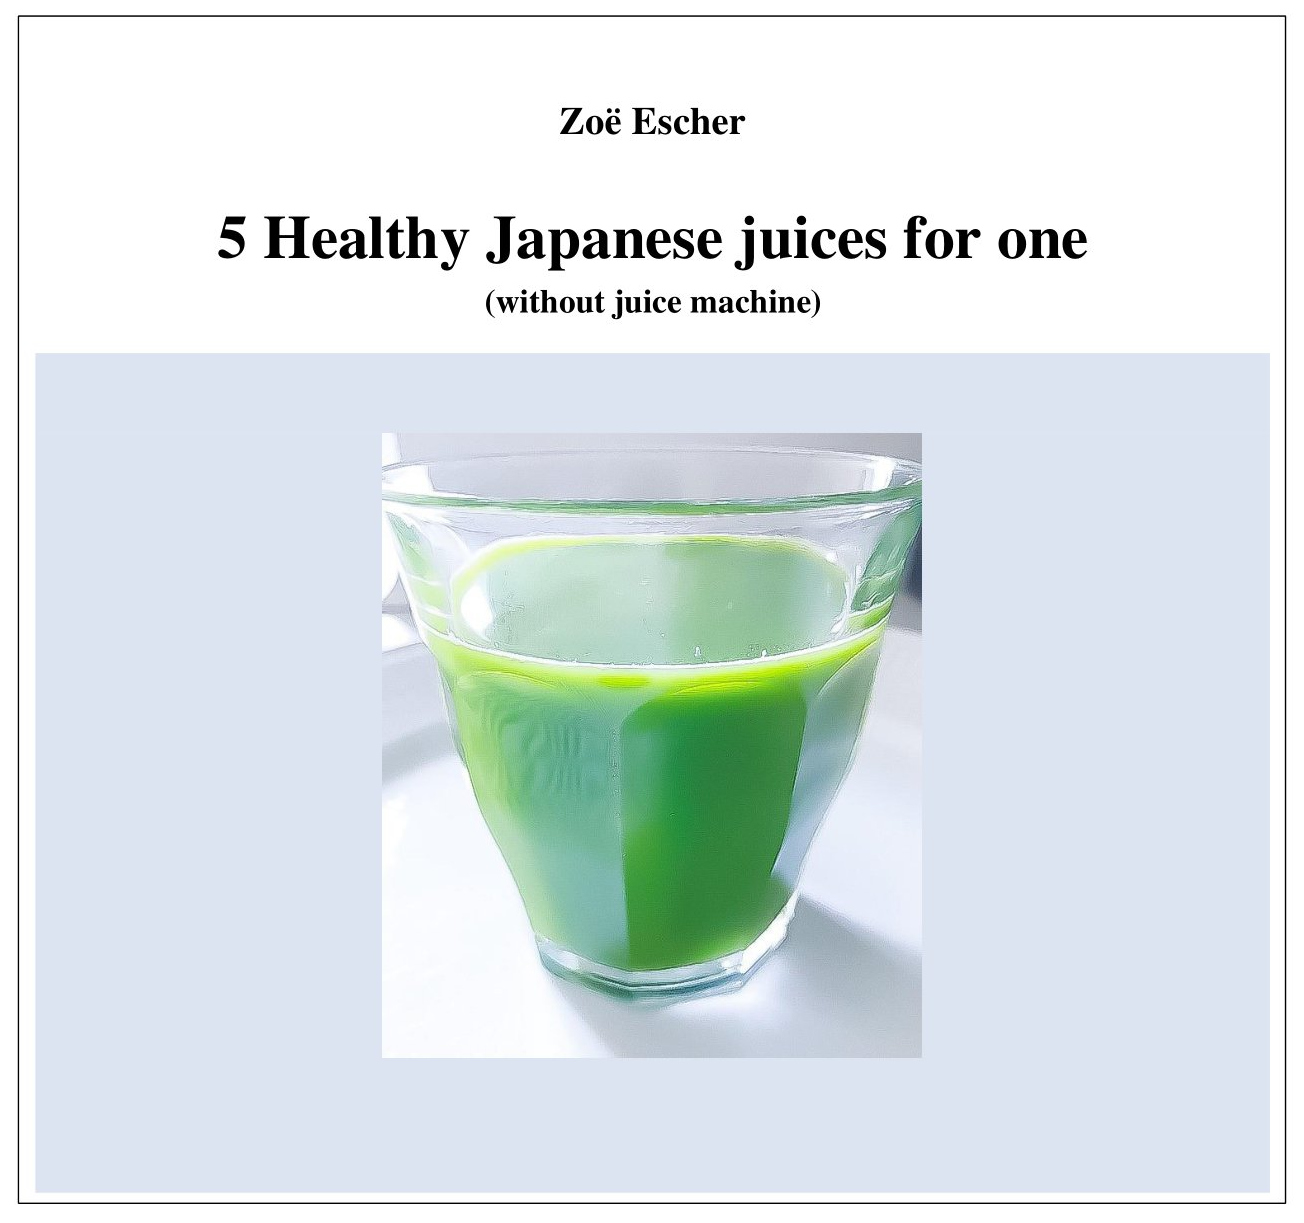 5 Healthy Japanese juices for one